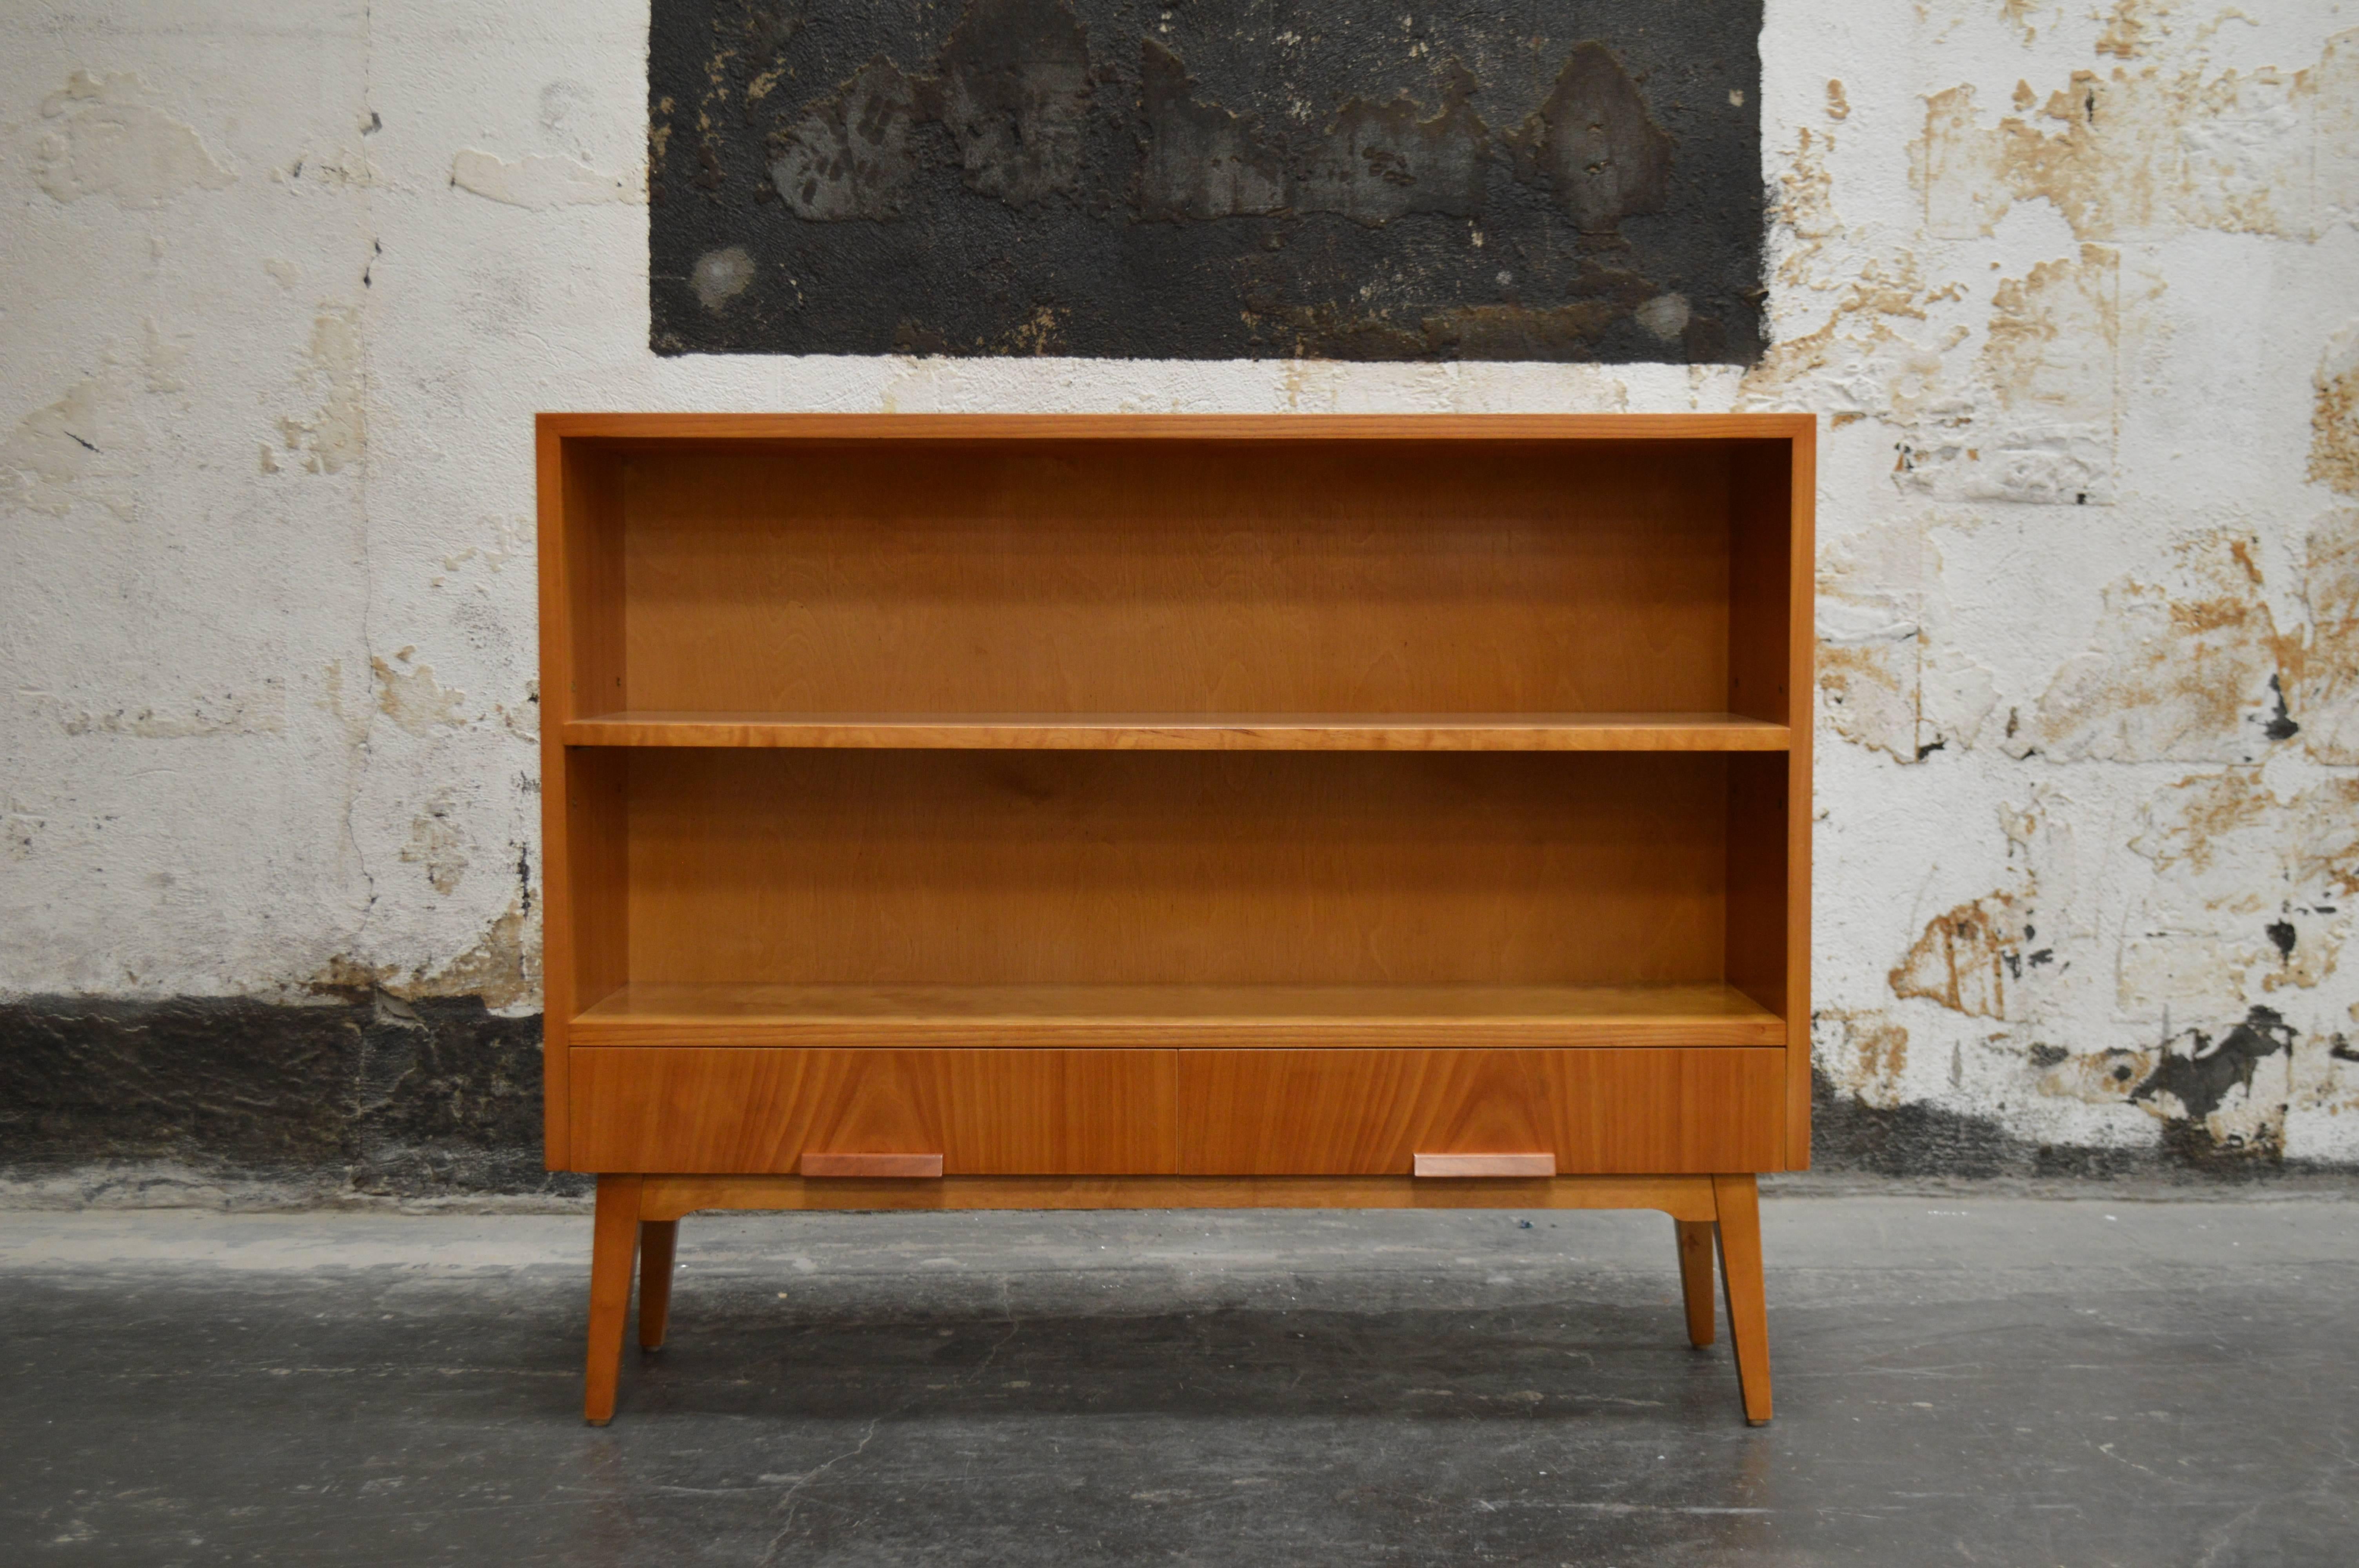 Swedish Art Moderne bookcase in golden elm. Two lower drawers. Modern lines atop handsome tapered legs. 

Approximately ten inches between shelves as shown. Middle shelf is adjustable up or down by up to three inches.